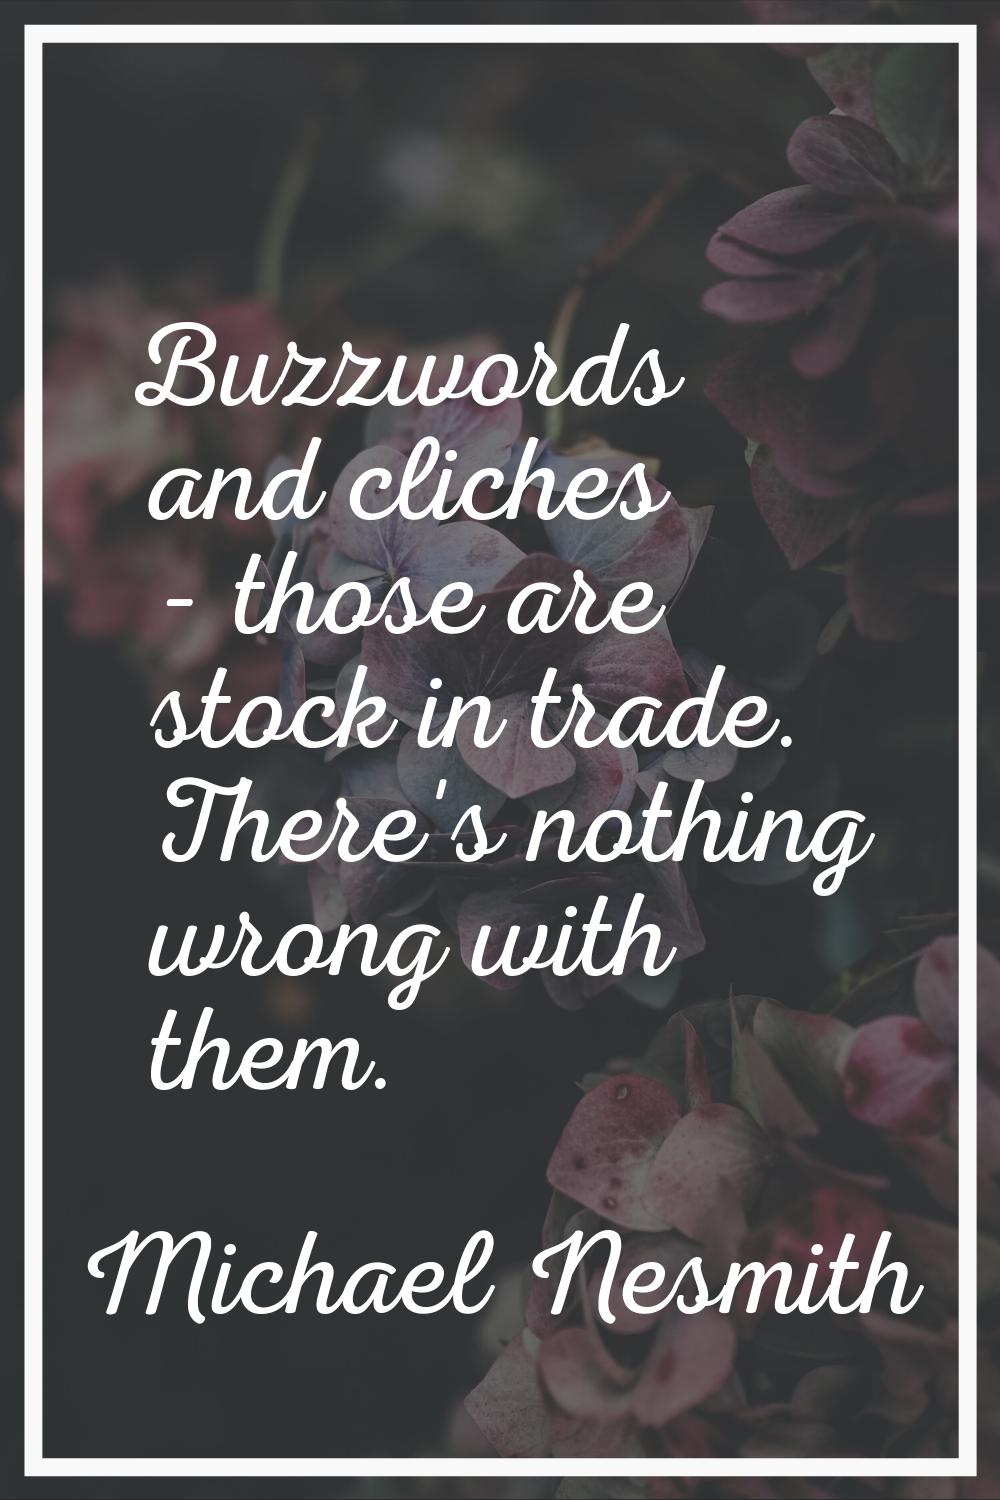 Buzzwords and cliches - those are stock in trade. There's nothing wrong with them.